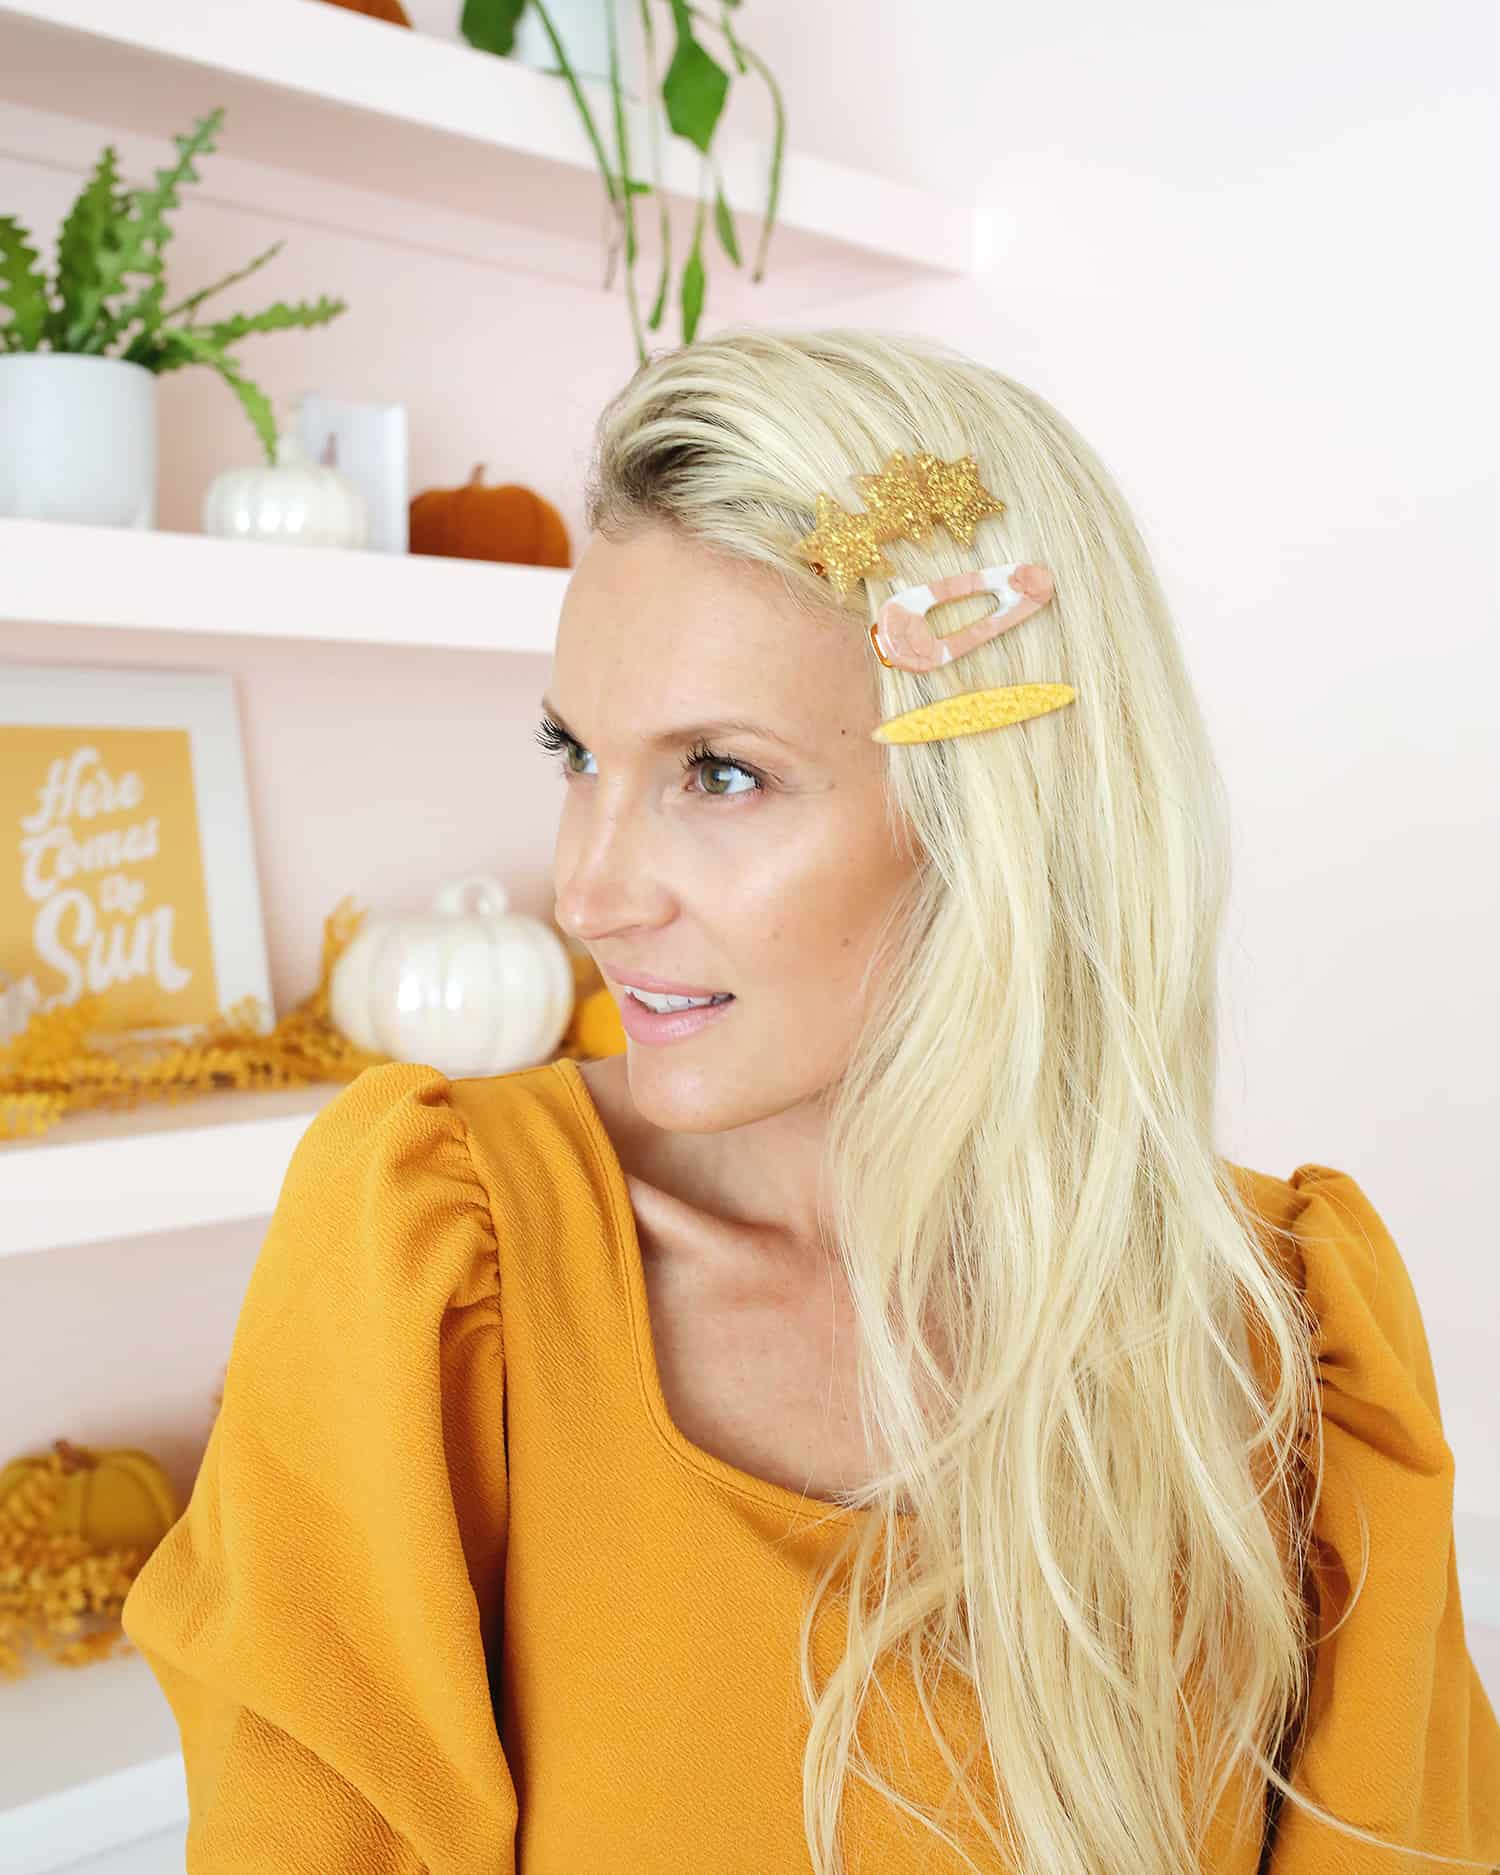 How To Make Statement Hair Clips At Home! - A Beautiful Mess